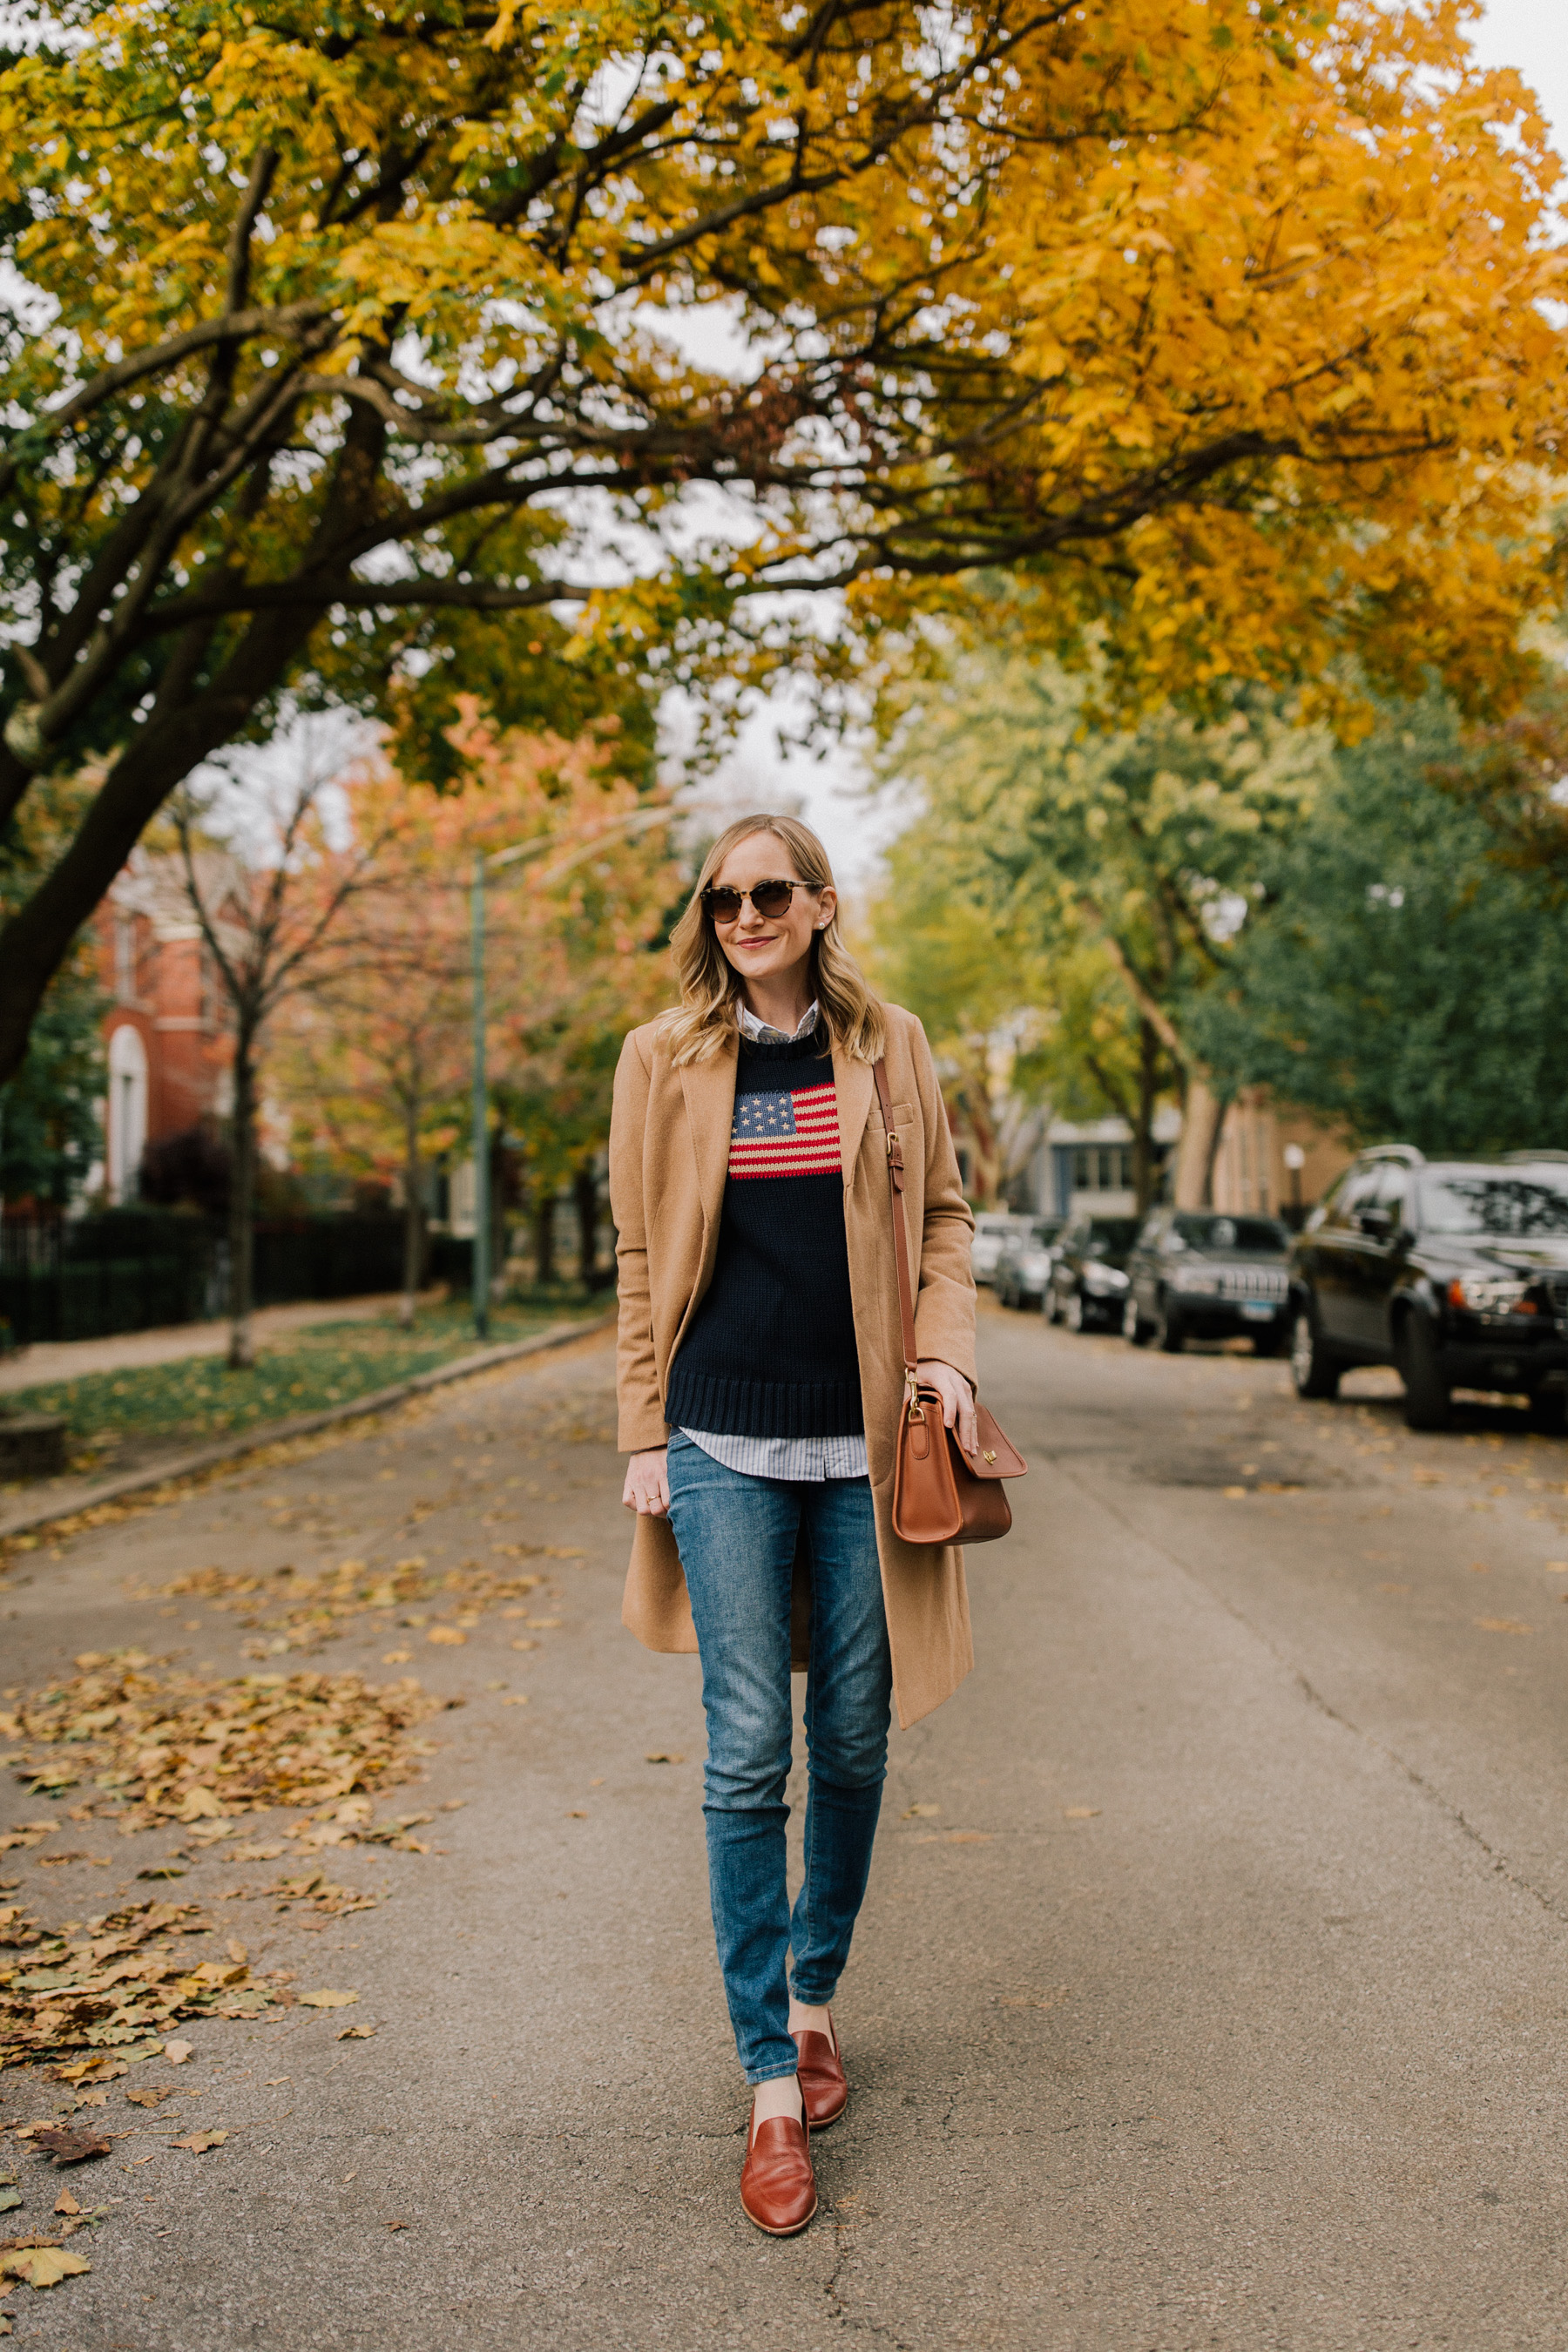 On Kelly: Ralph Lauren American Flag Sweater, Camel Coat, Striped Button Down